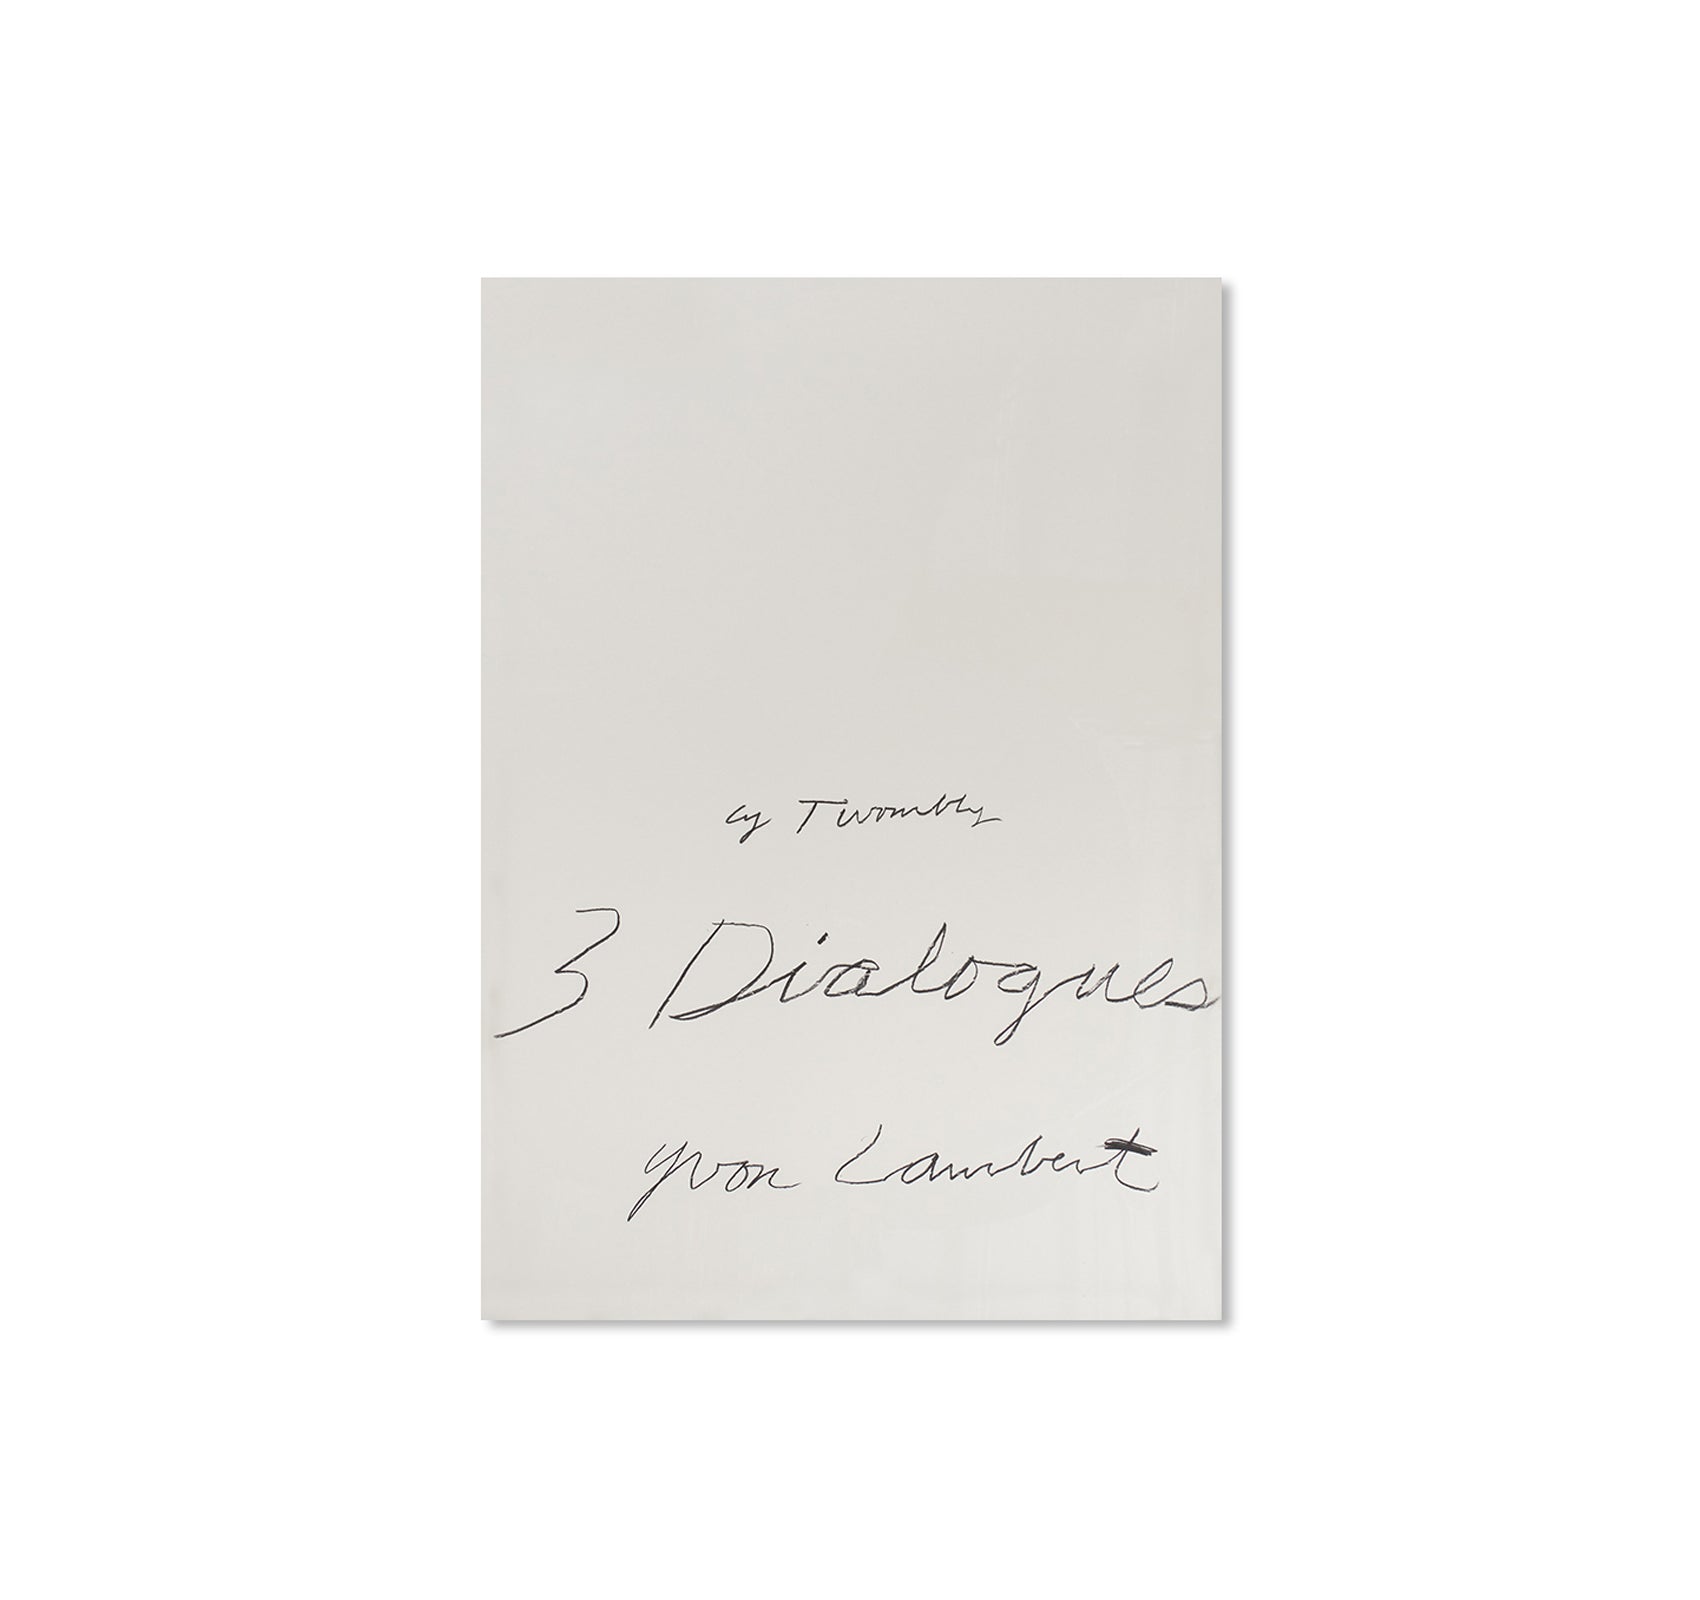 THREE DIALOGUES.1 PRINT (1977) by Cy Twombly [REPRINTED EDITION]